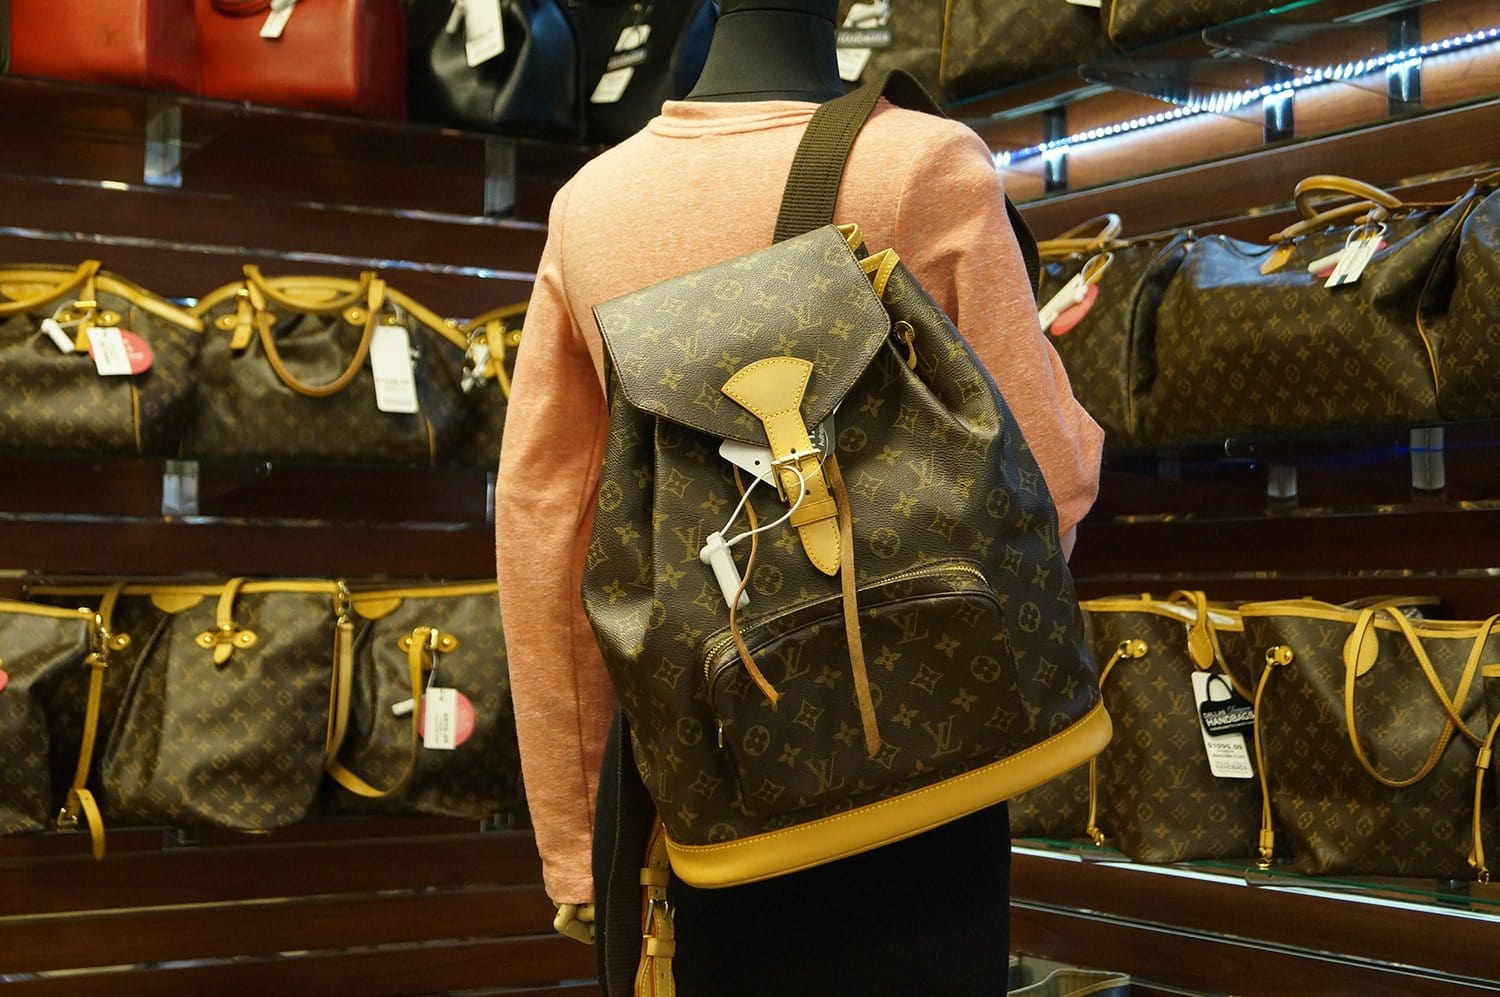 vuitton backpack gm